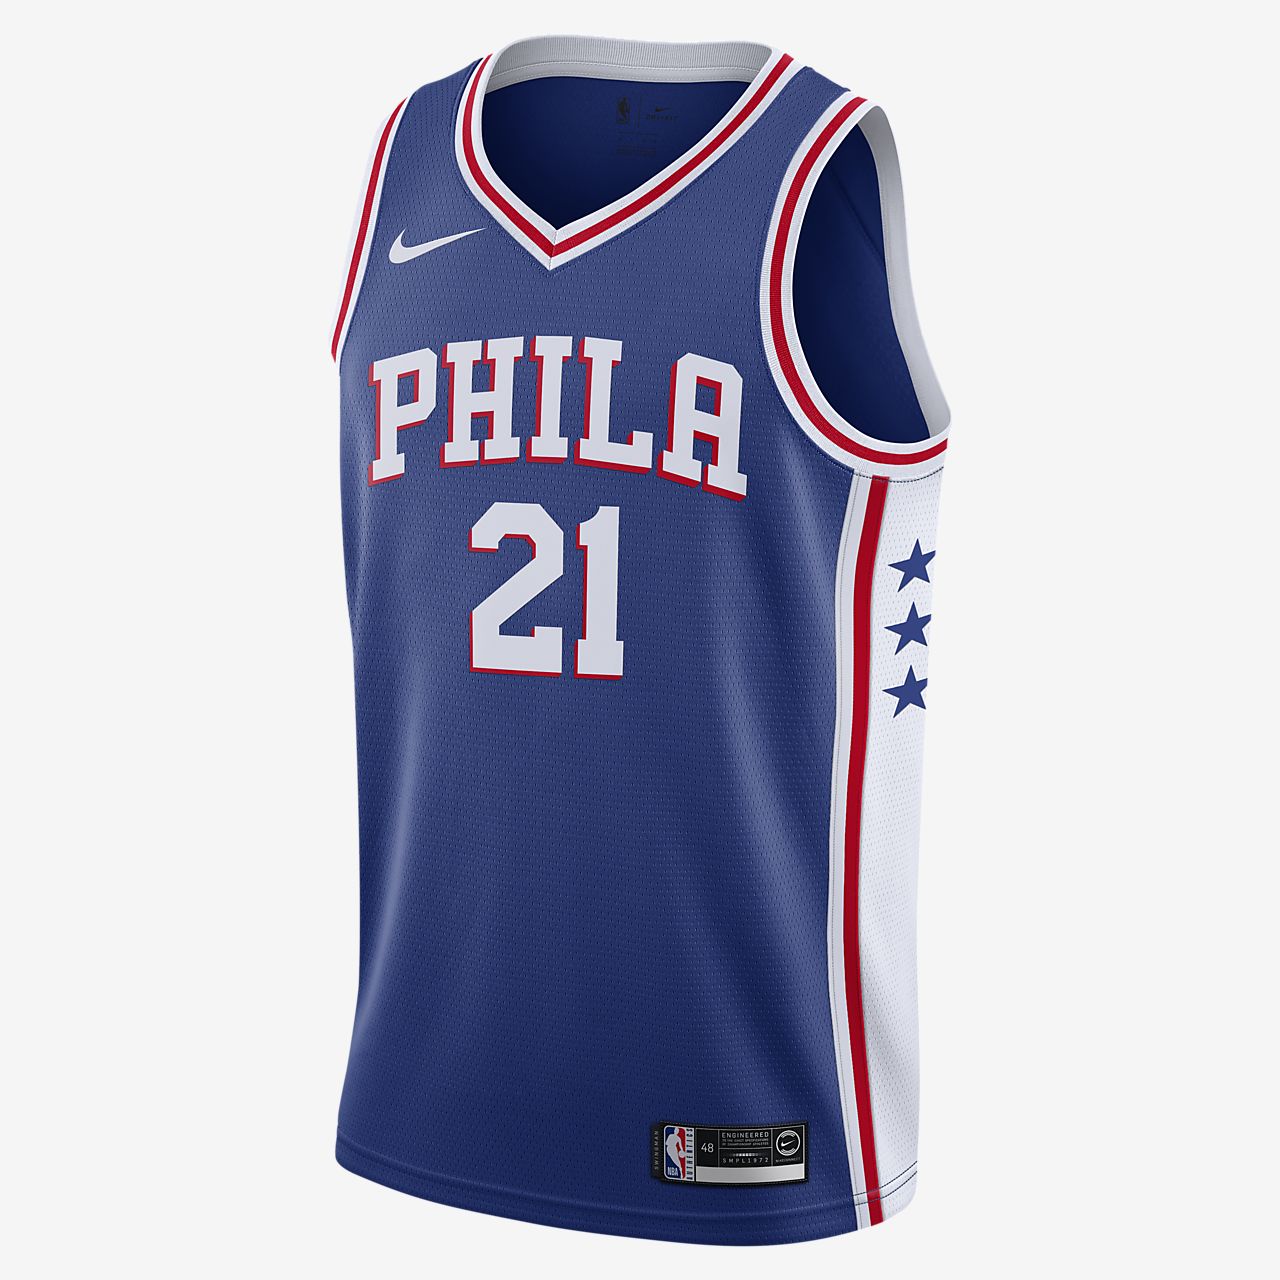 76ers embiid jersey